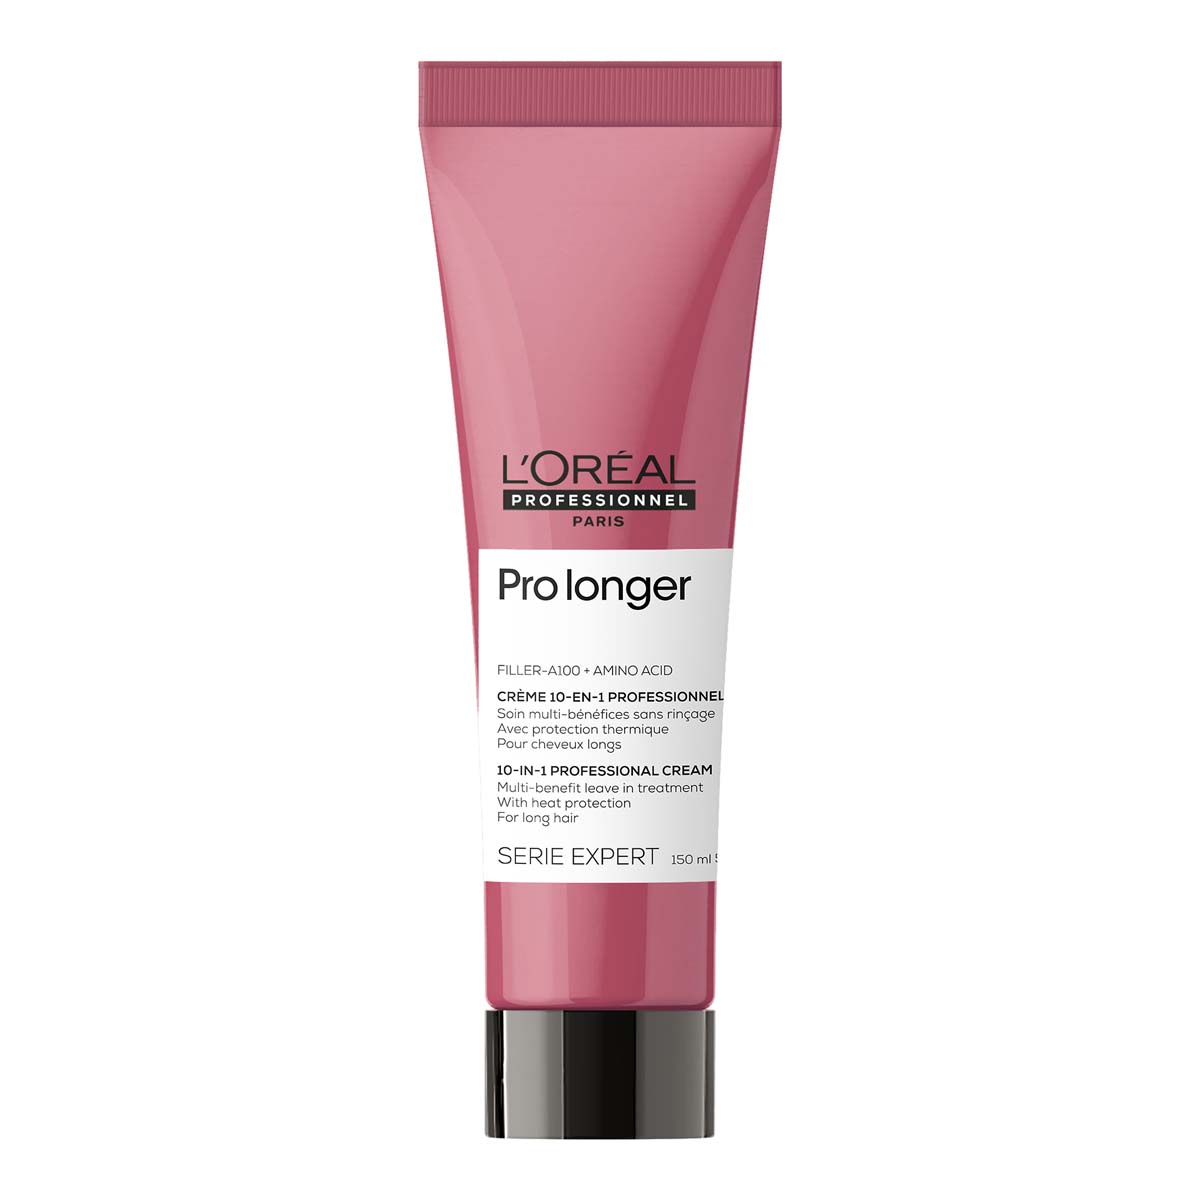 L'Oreal Professionnel Pro Longer 10-In-1 Cream With Filler-A100 And Amino Acid 150Ml